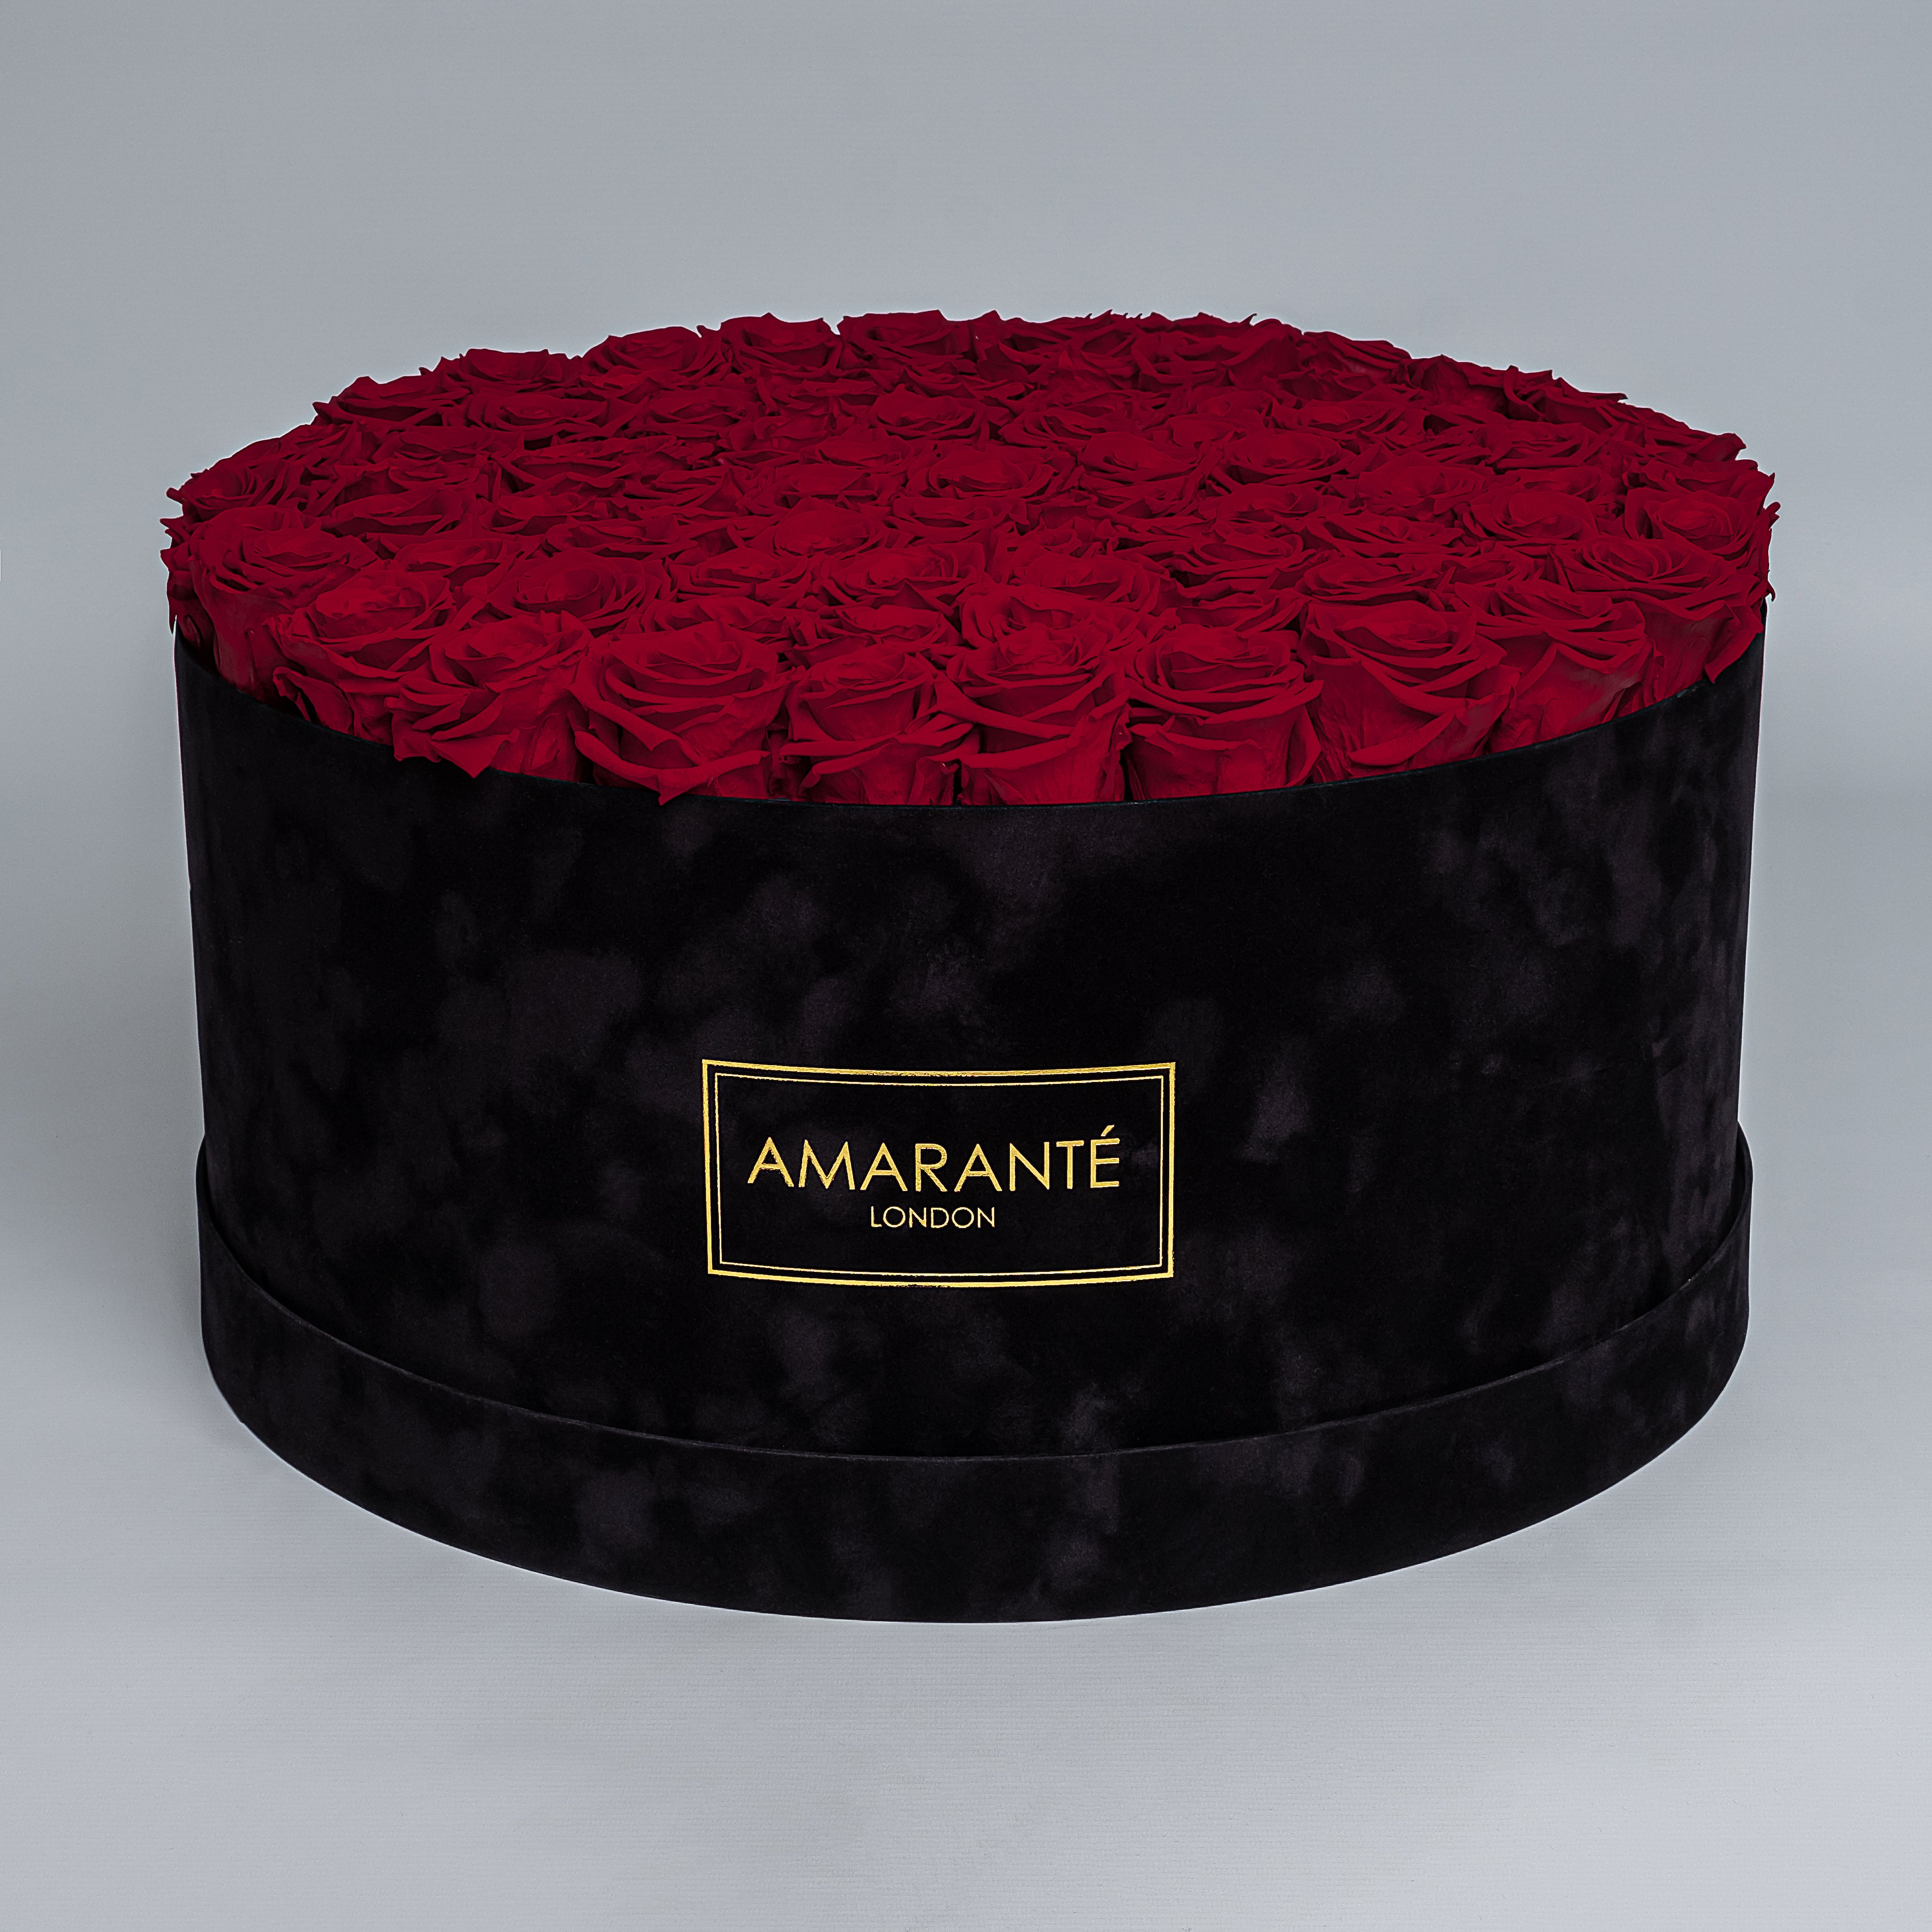 Extra Large Luxury bouquet of 100 deep red infinity roses in an elegant black round rose box with delicate suede finish. Unique gift for showing timeless love and affection. FreeUK Delivery.